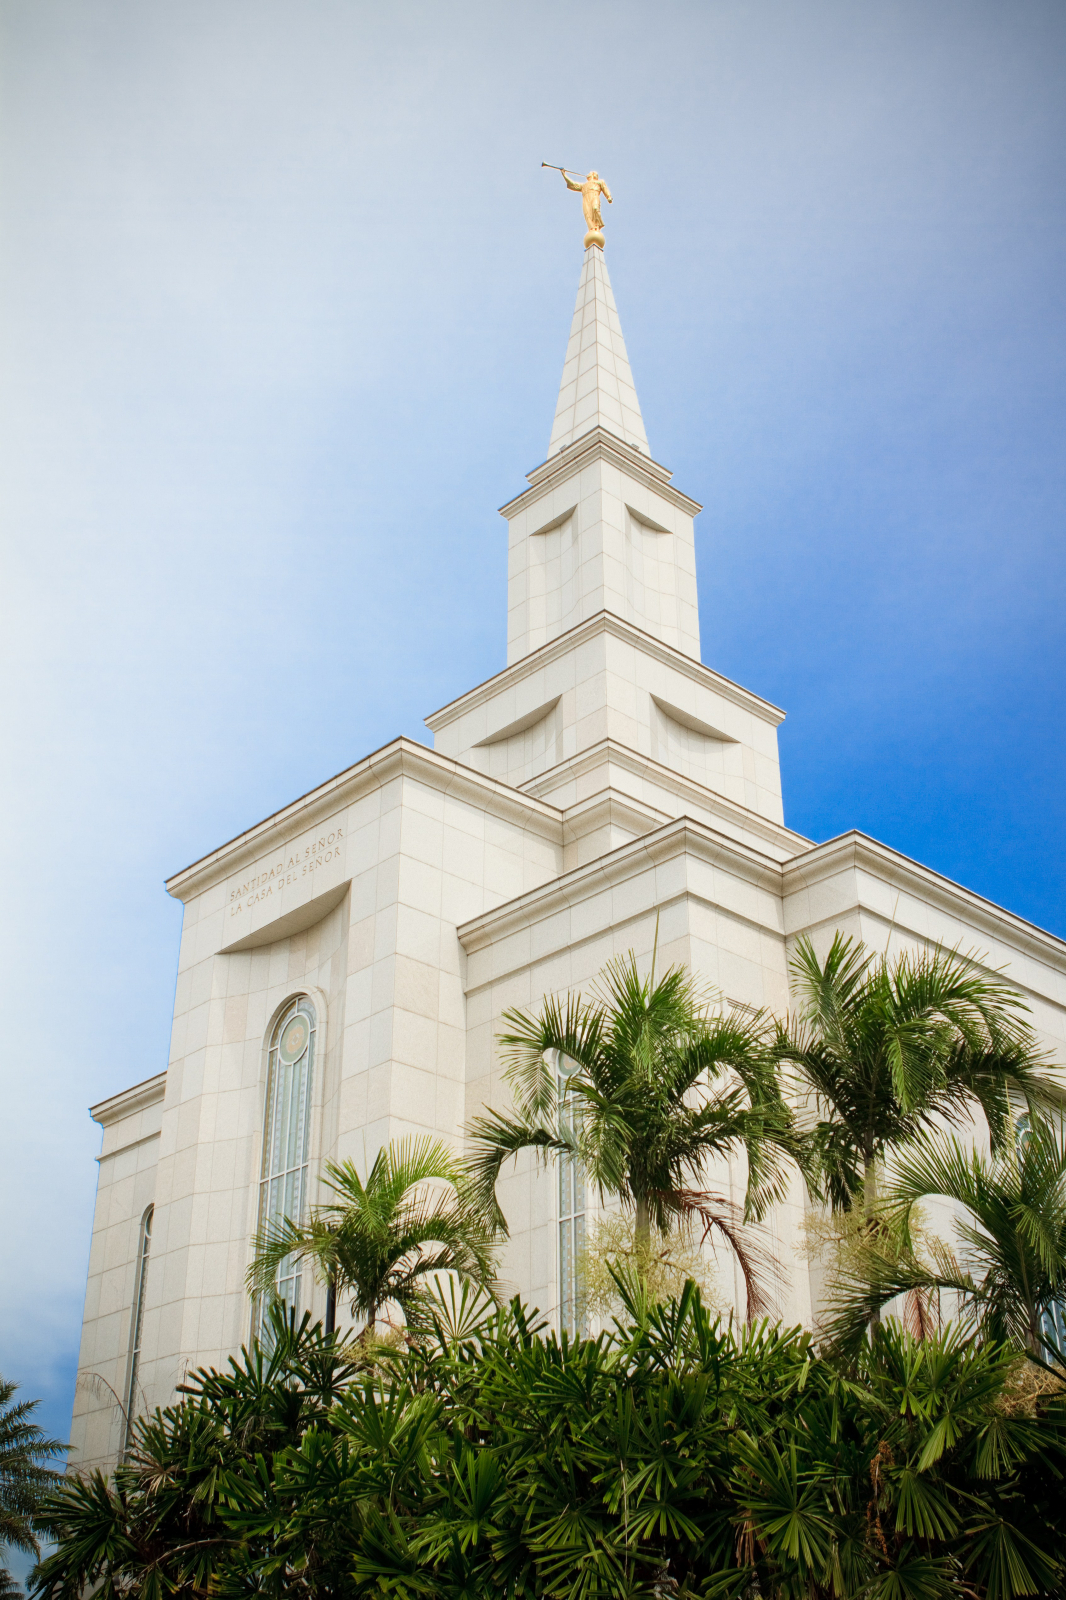 The Spire of the Guayaquil Ecuador Temple